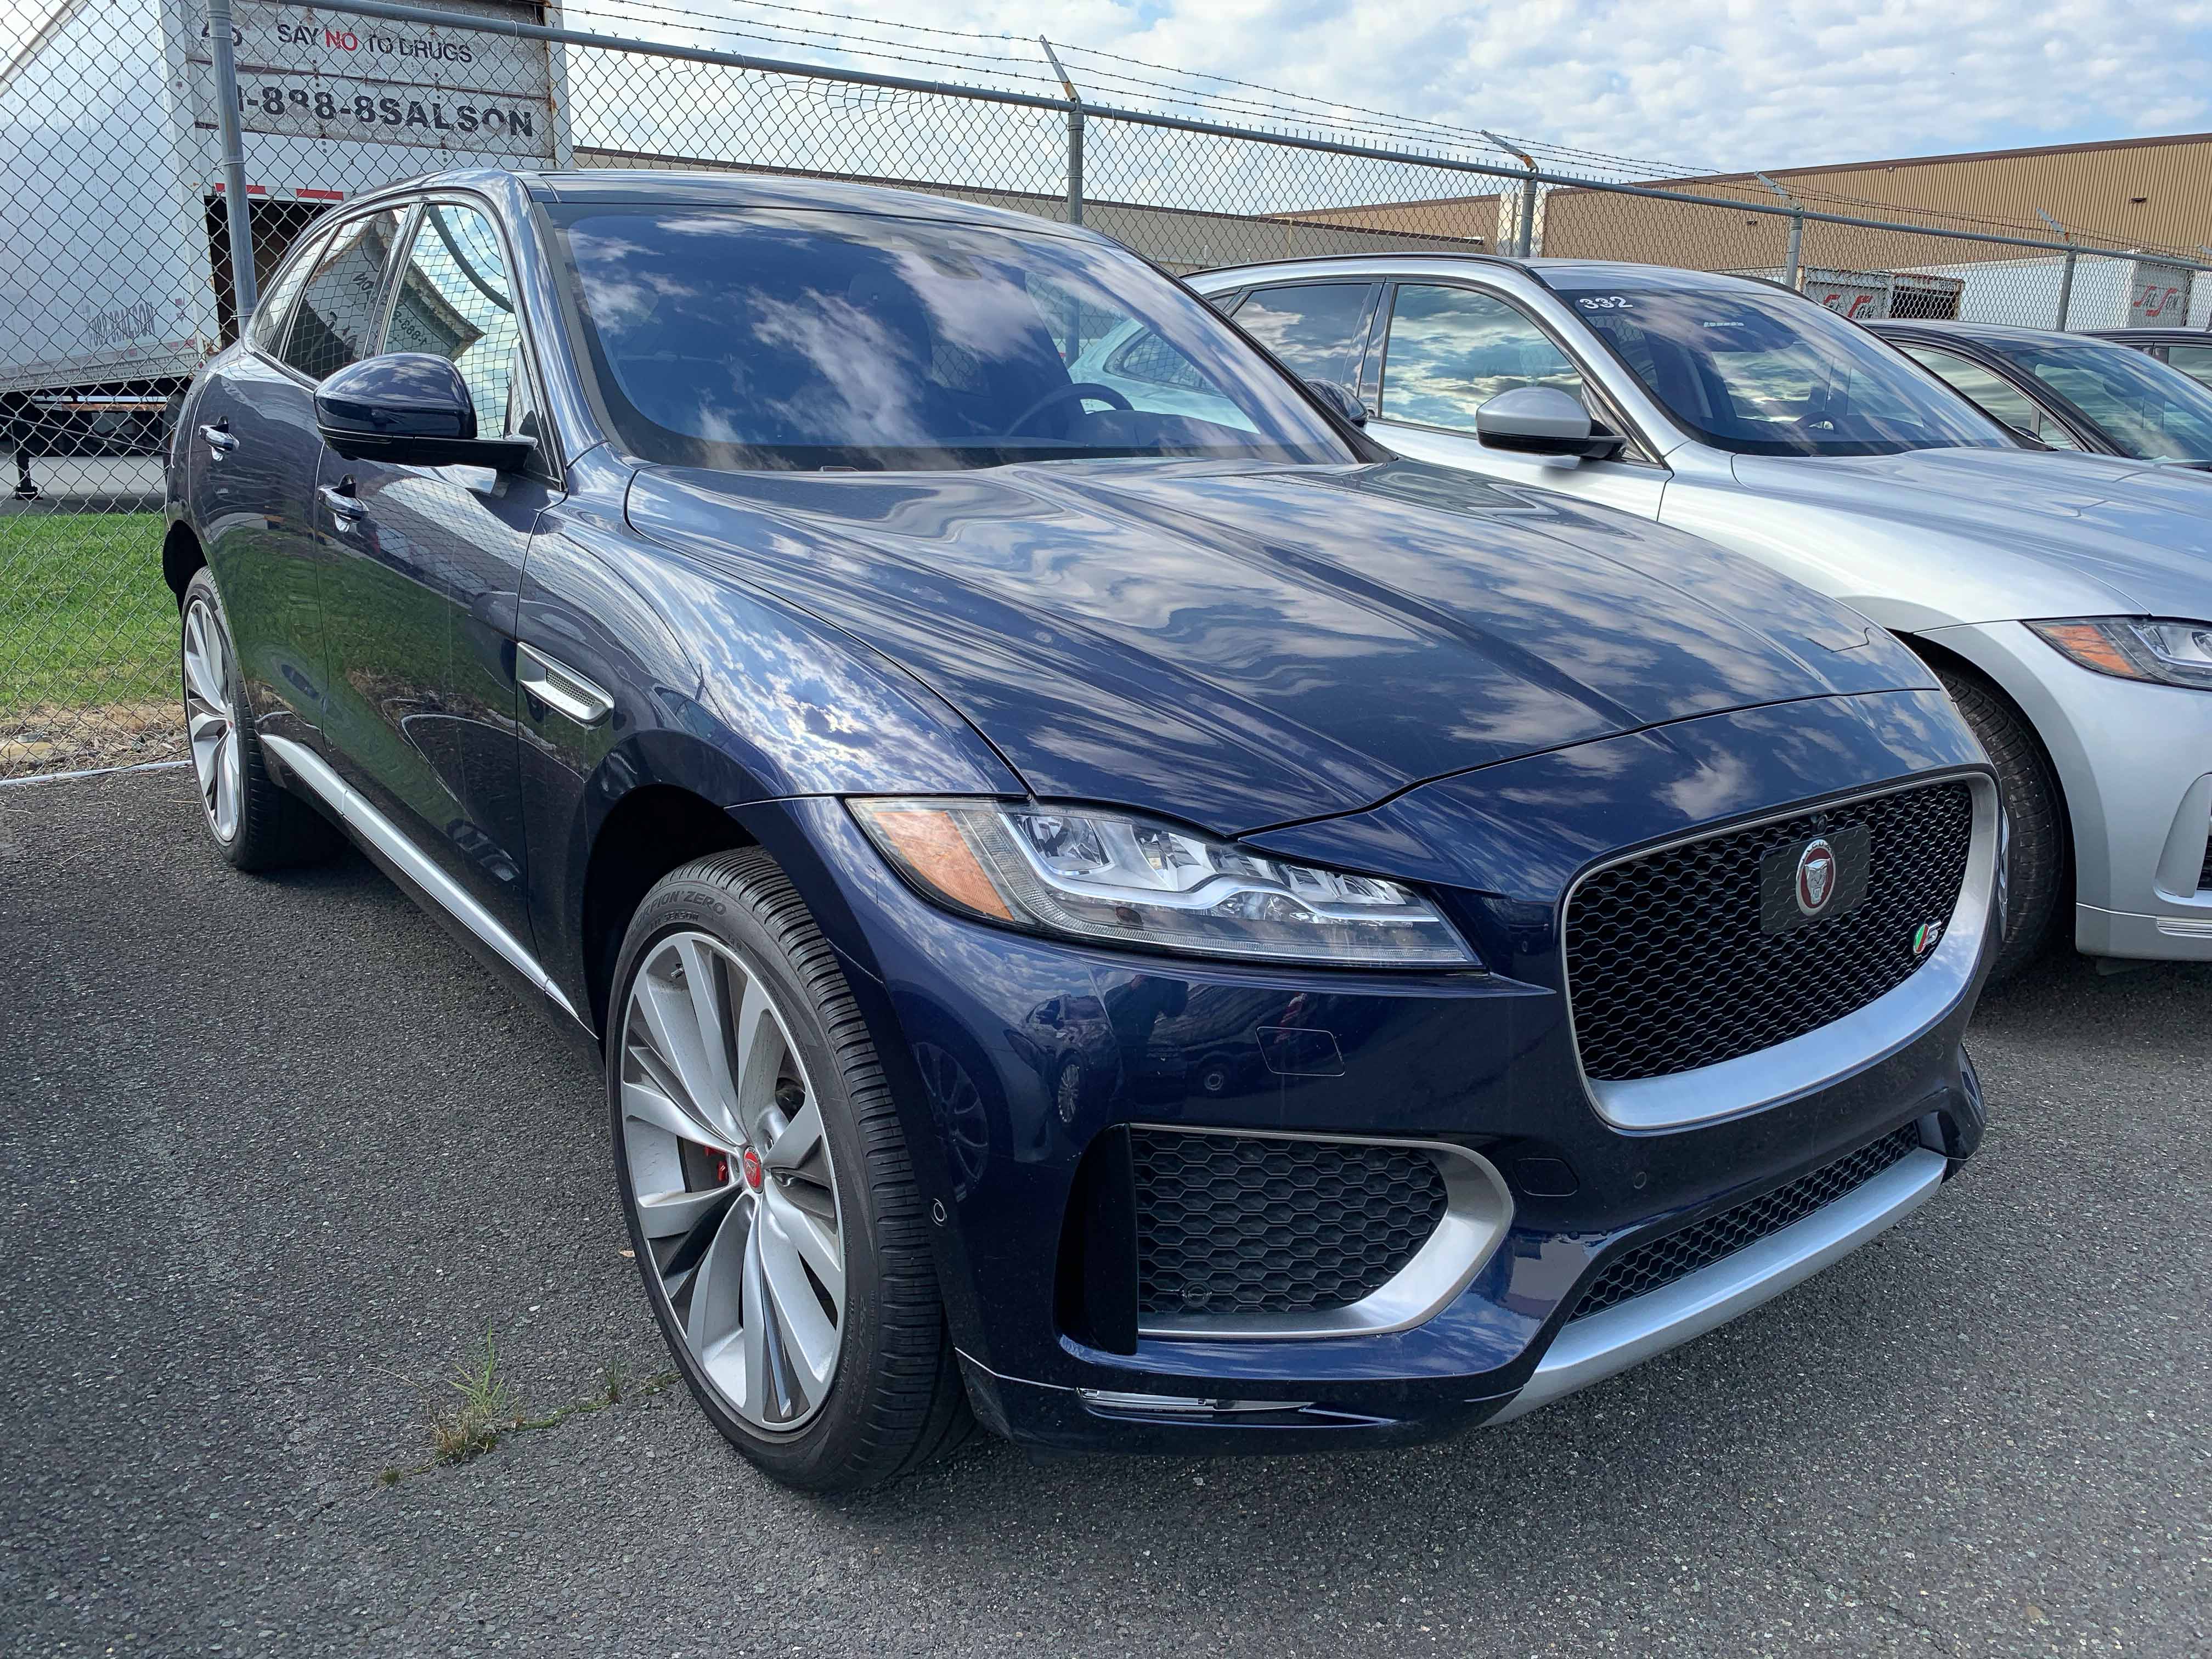 Certified Pre-Owned 2018 Jaguar F-PACE S AWD S 4dr SUV in Edison #J17696B | Ray Catena Jaguar of ...